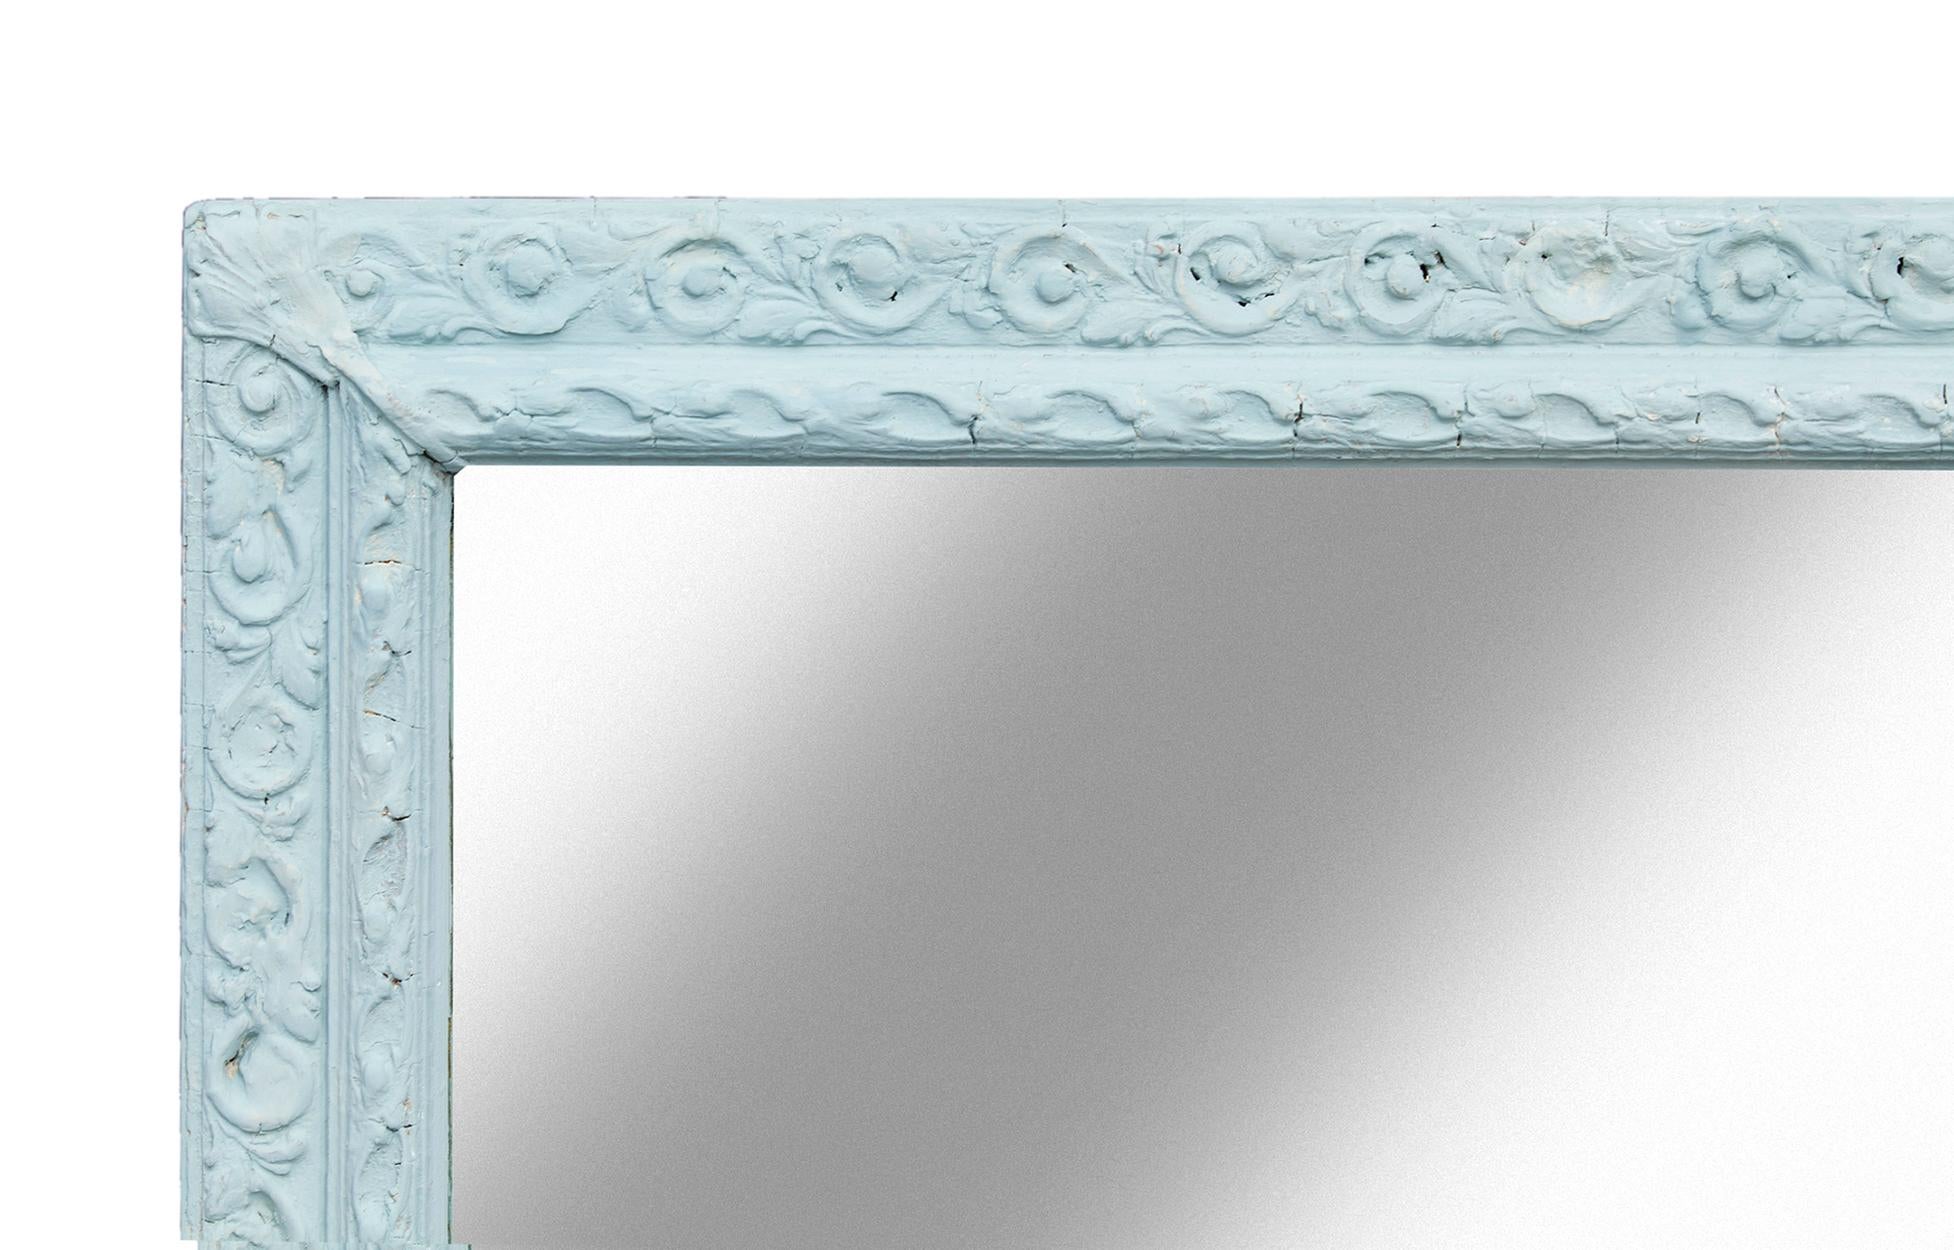 Large reticulating Victorian mirror, ornate repeat pattern, hand painted in pale blue velvety finish. Wired to hang both horizontally & vertically. 
New backing & wire.